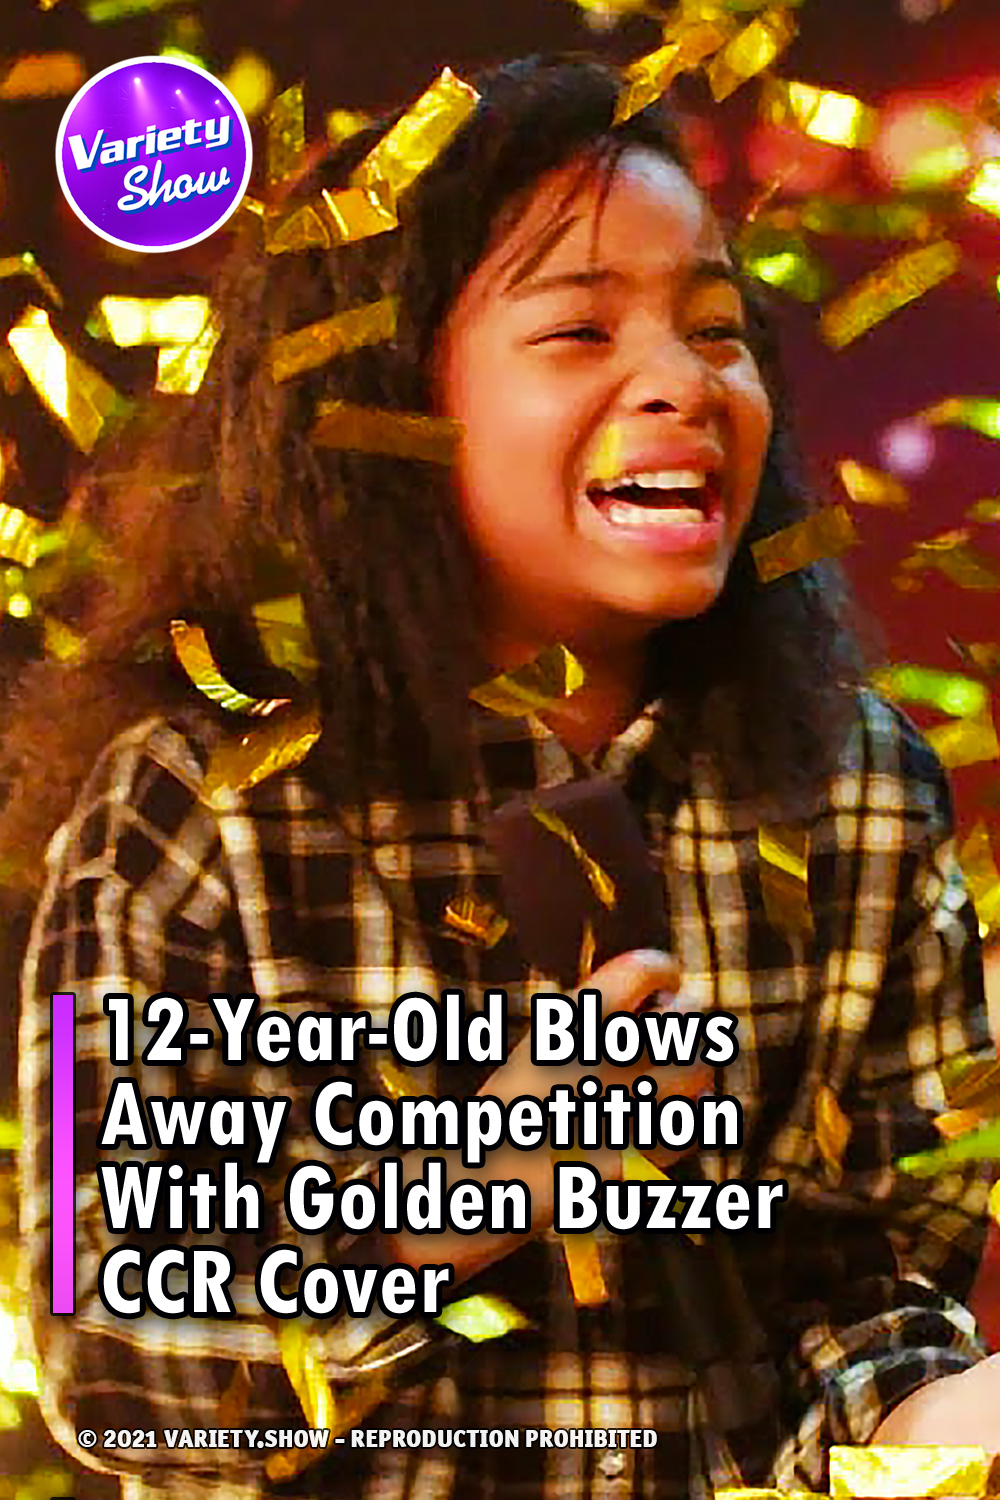 12-Year-Old Blows Away Competition With Golden Buzzer CCR Cover